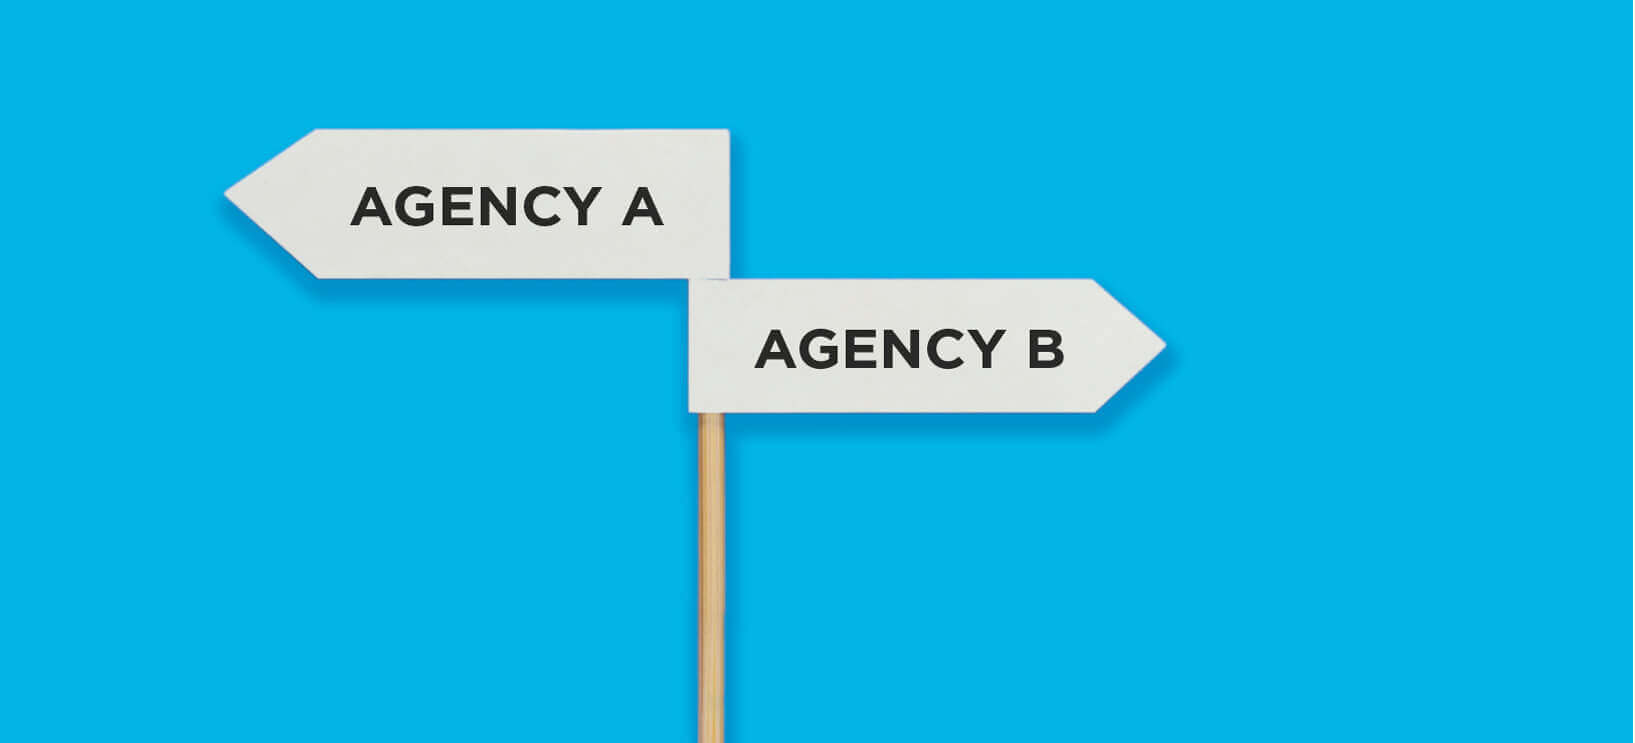 Top Questions to Ask When Evaluating Web Design Agencies for a B2B Site